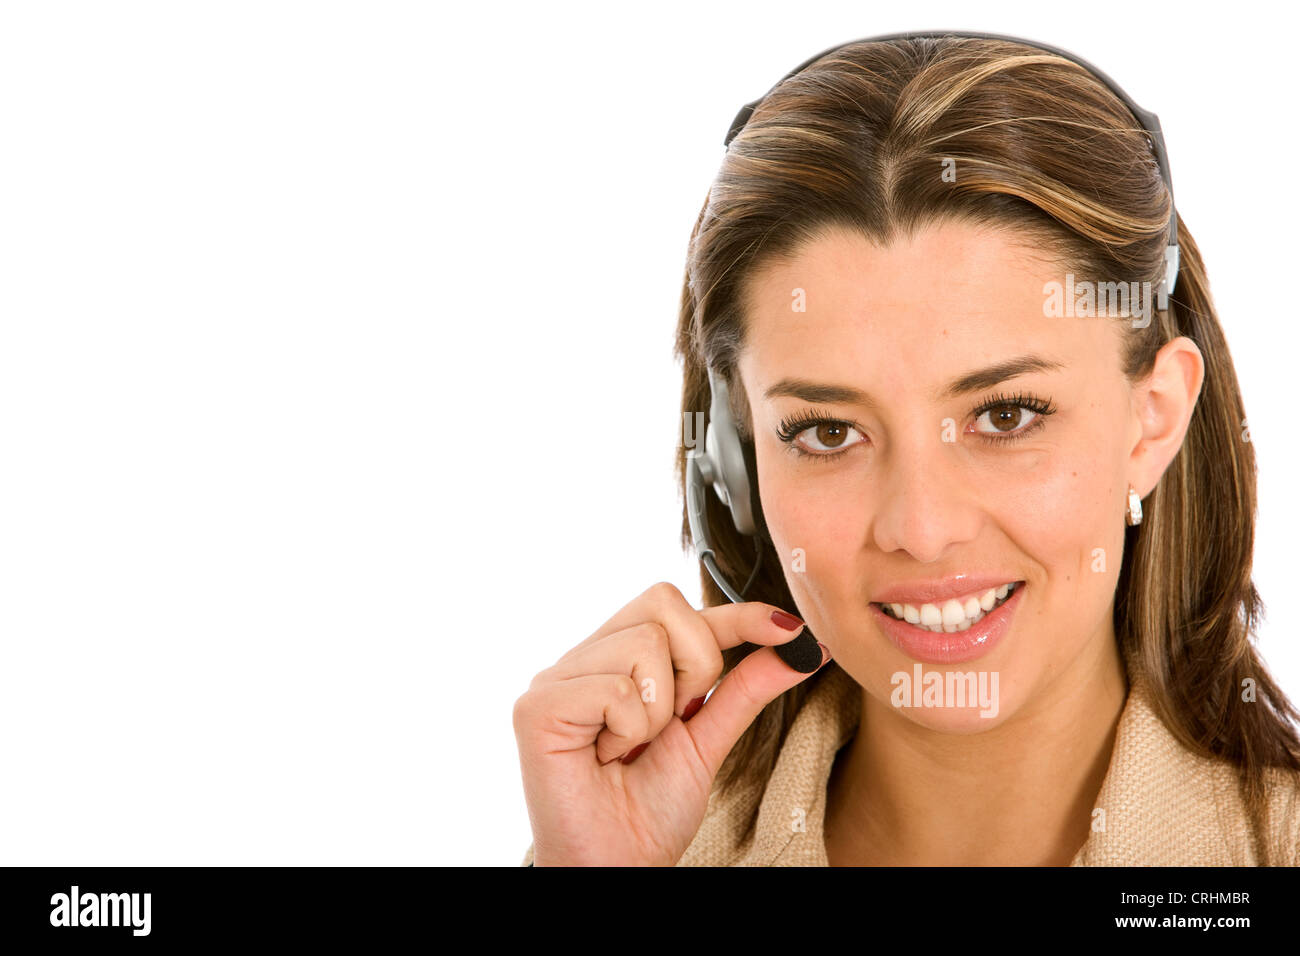 business customer support operator woman with headset smiling Stock Photo